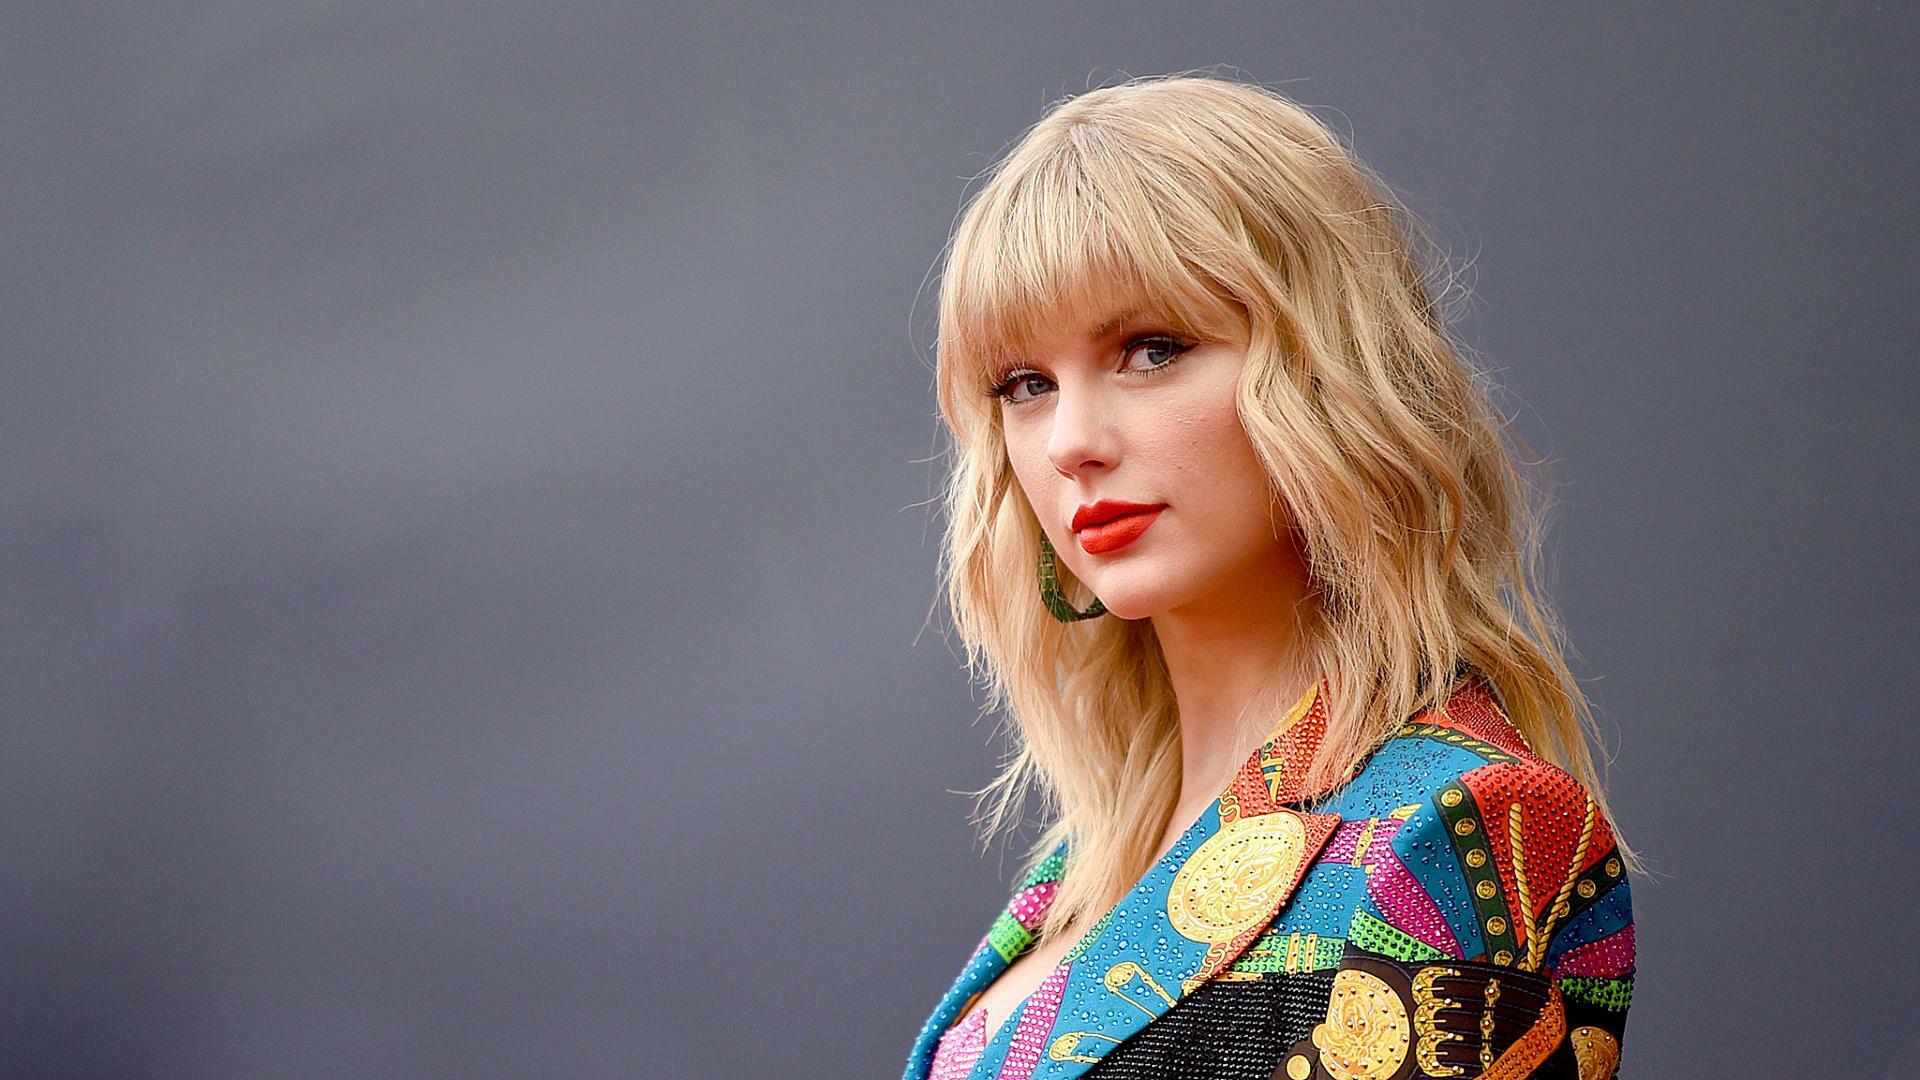 Taylor Swift Book Recommendations: What Are Her Favorite Books?